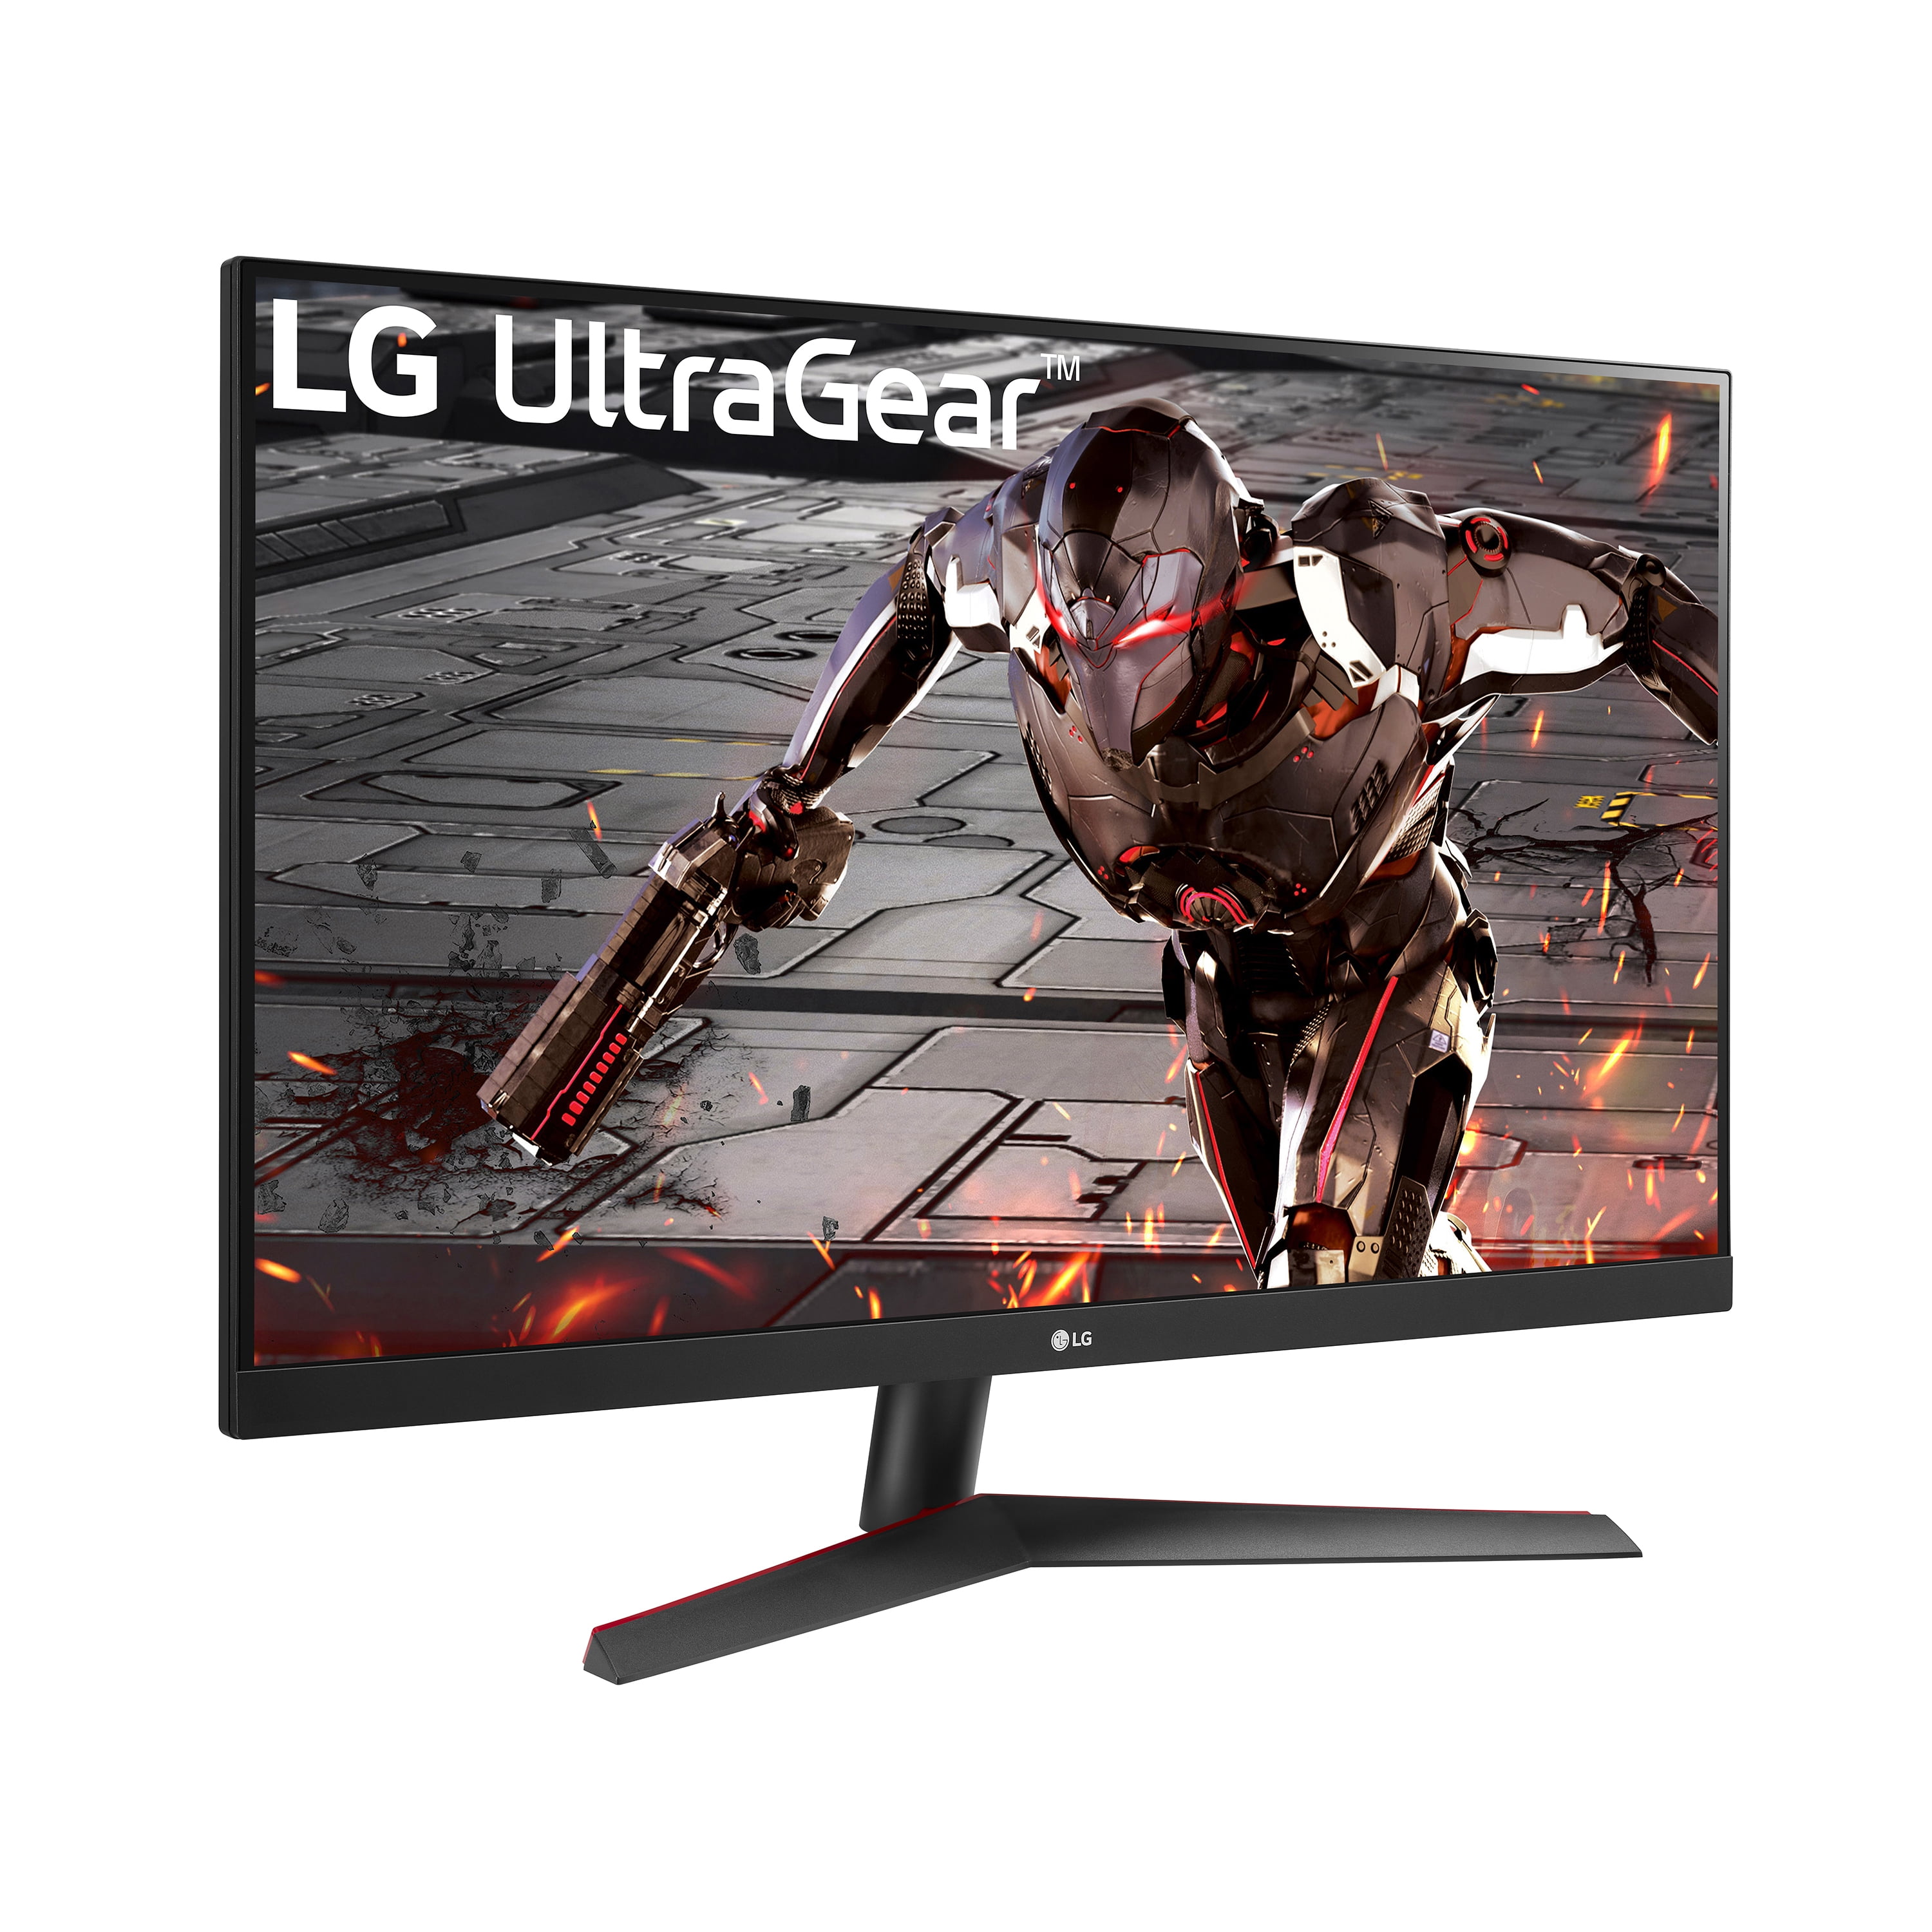 Last Chance Deal: Grab an LG 24-inch UltraGear Gaming Monitor at Walmart  for Cyber Monday - IGN